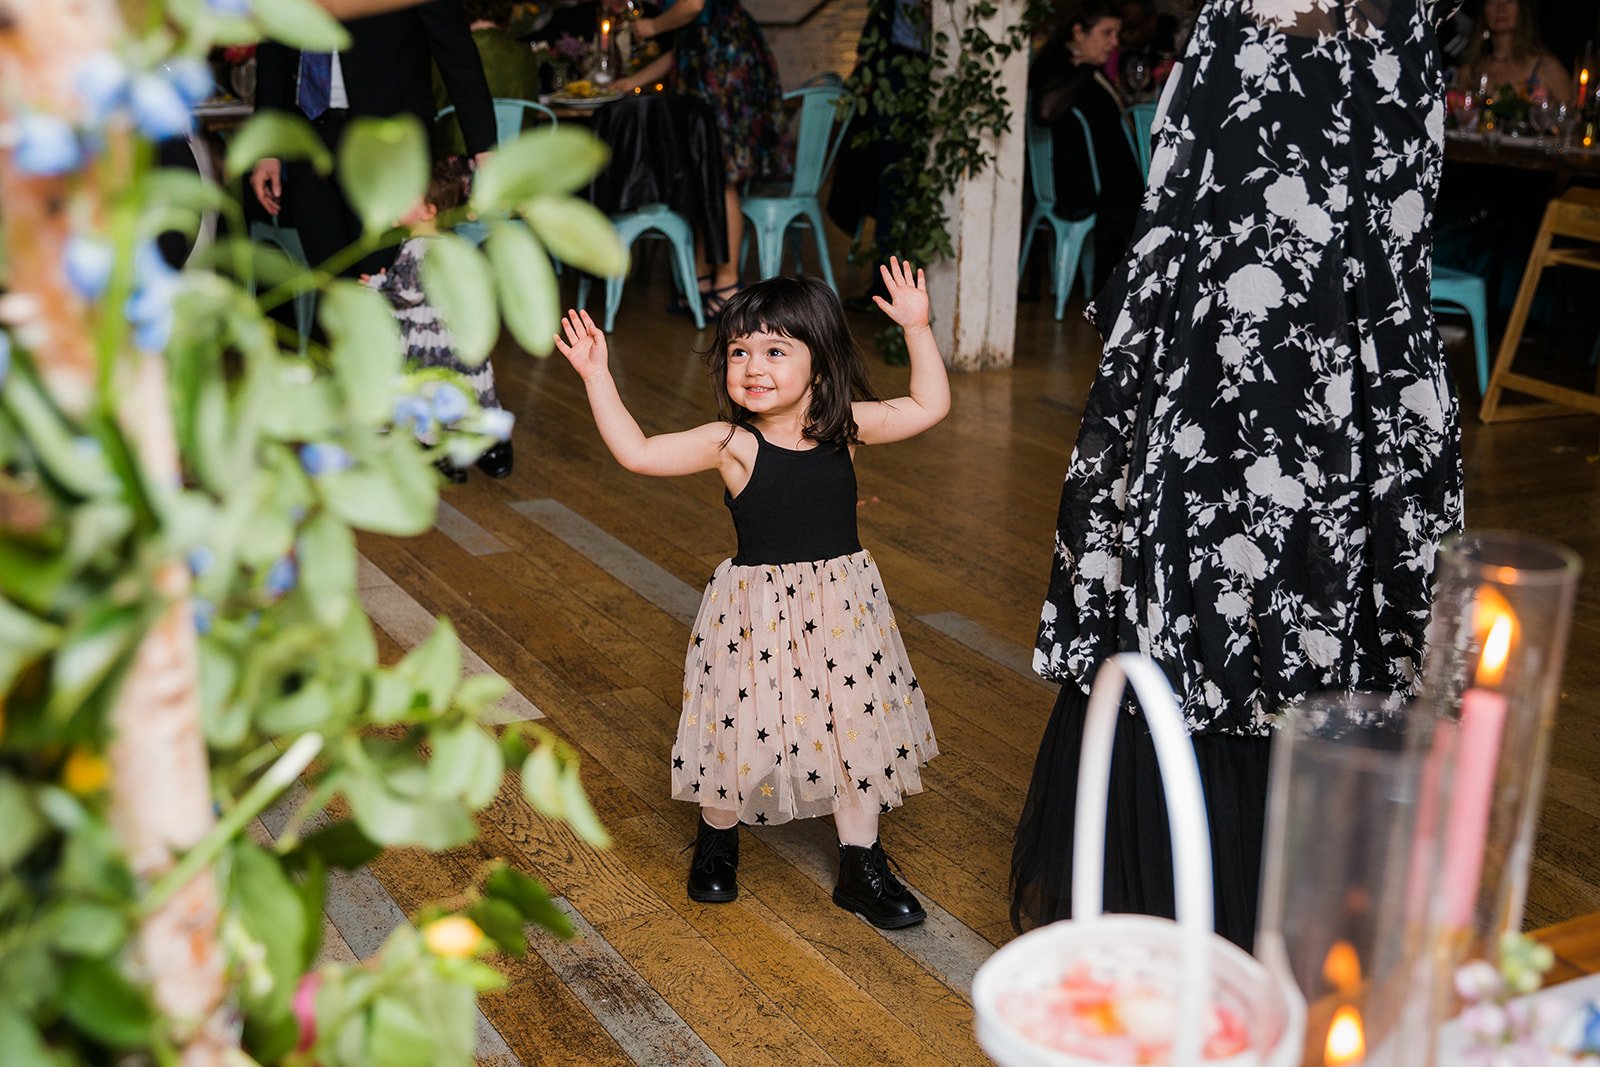  Documentary candid photo flower girl dancing during the reception at nontraditional Jewish and Venezuelan wedding at The Joinery Chicago an Industrial loft wedding venue In Logan Square.  